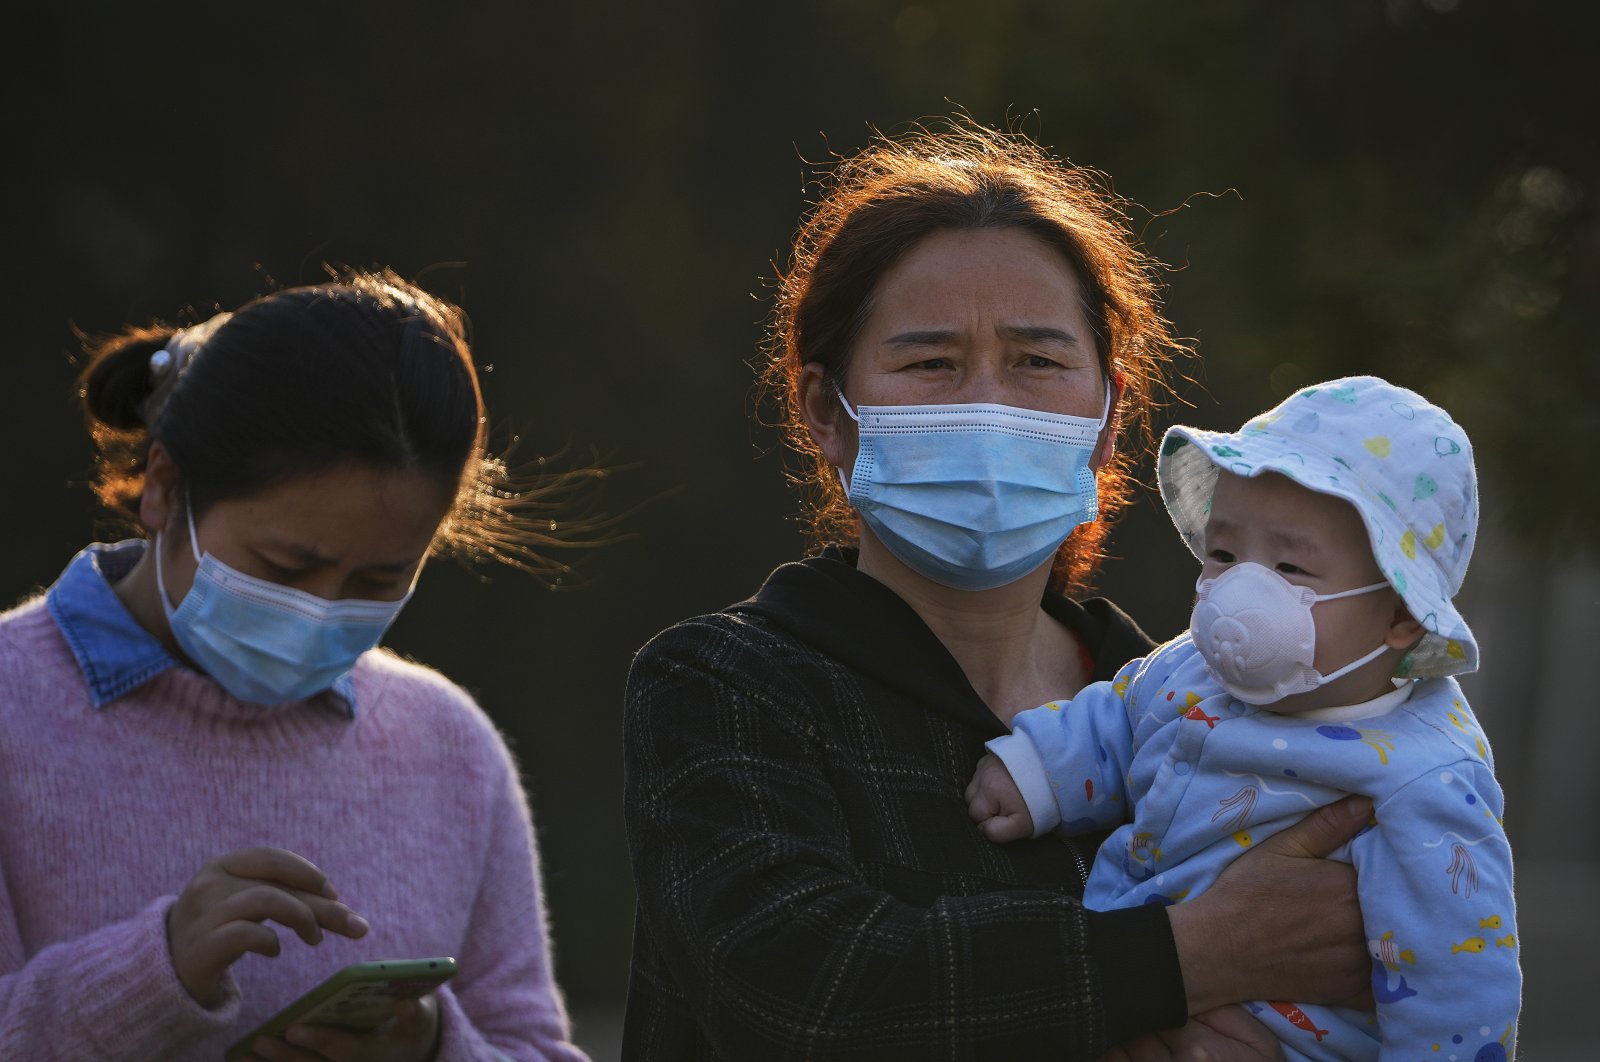 Residents wearing face masks to help protect from the coronavirus bring a masked child to visit a park in Beijing, China, April 3, 2022. (AP Photo)